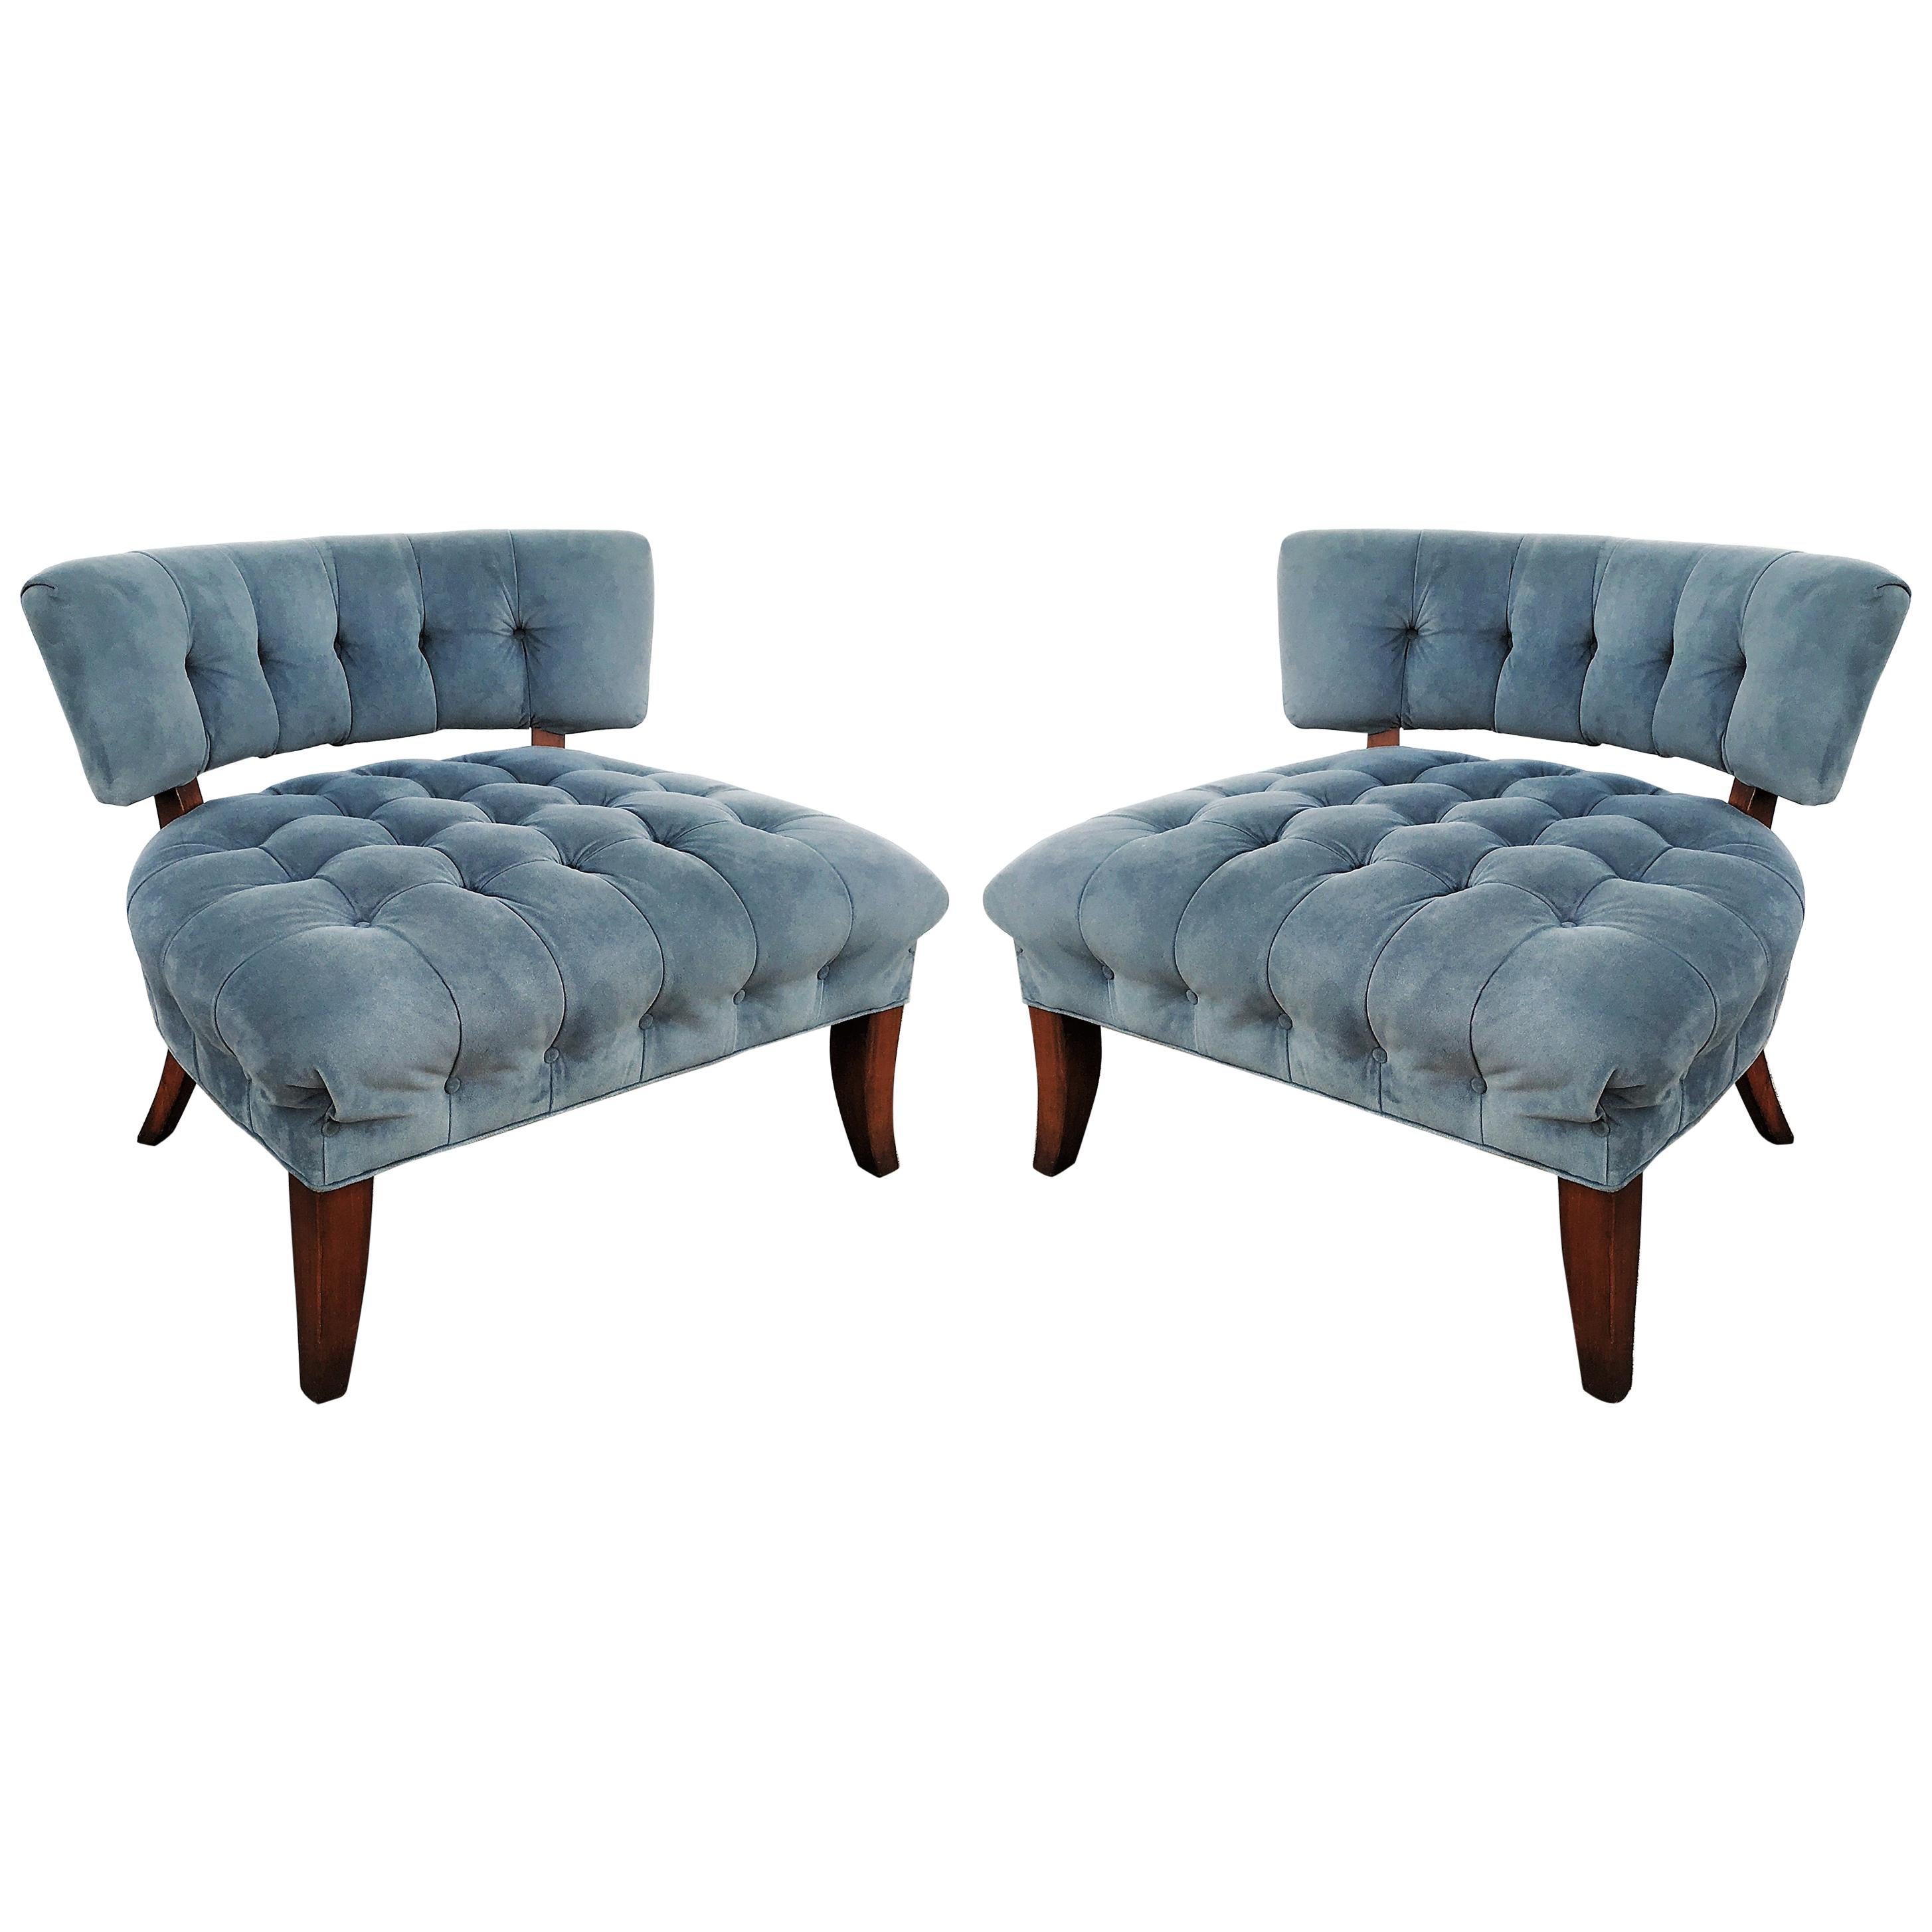 Pair of Mid-Century Modernist Slipper Chairs in the Manner of Billy Haines